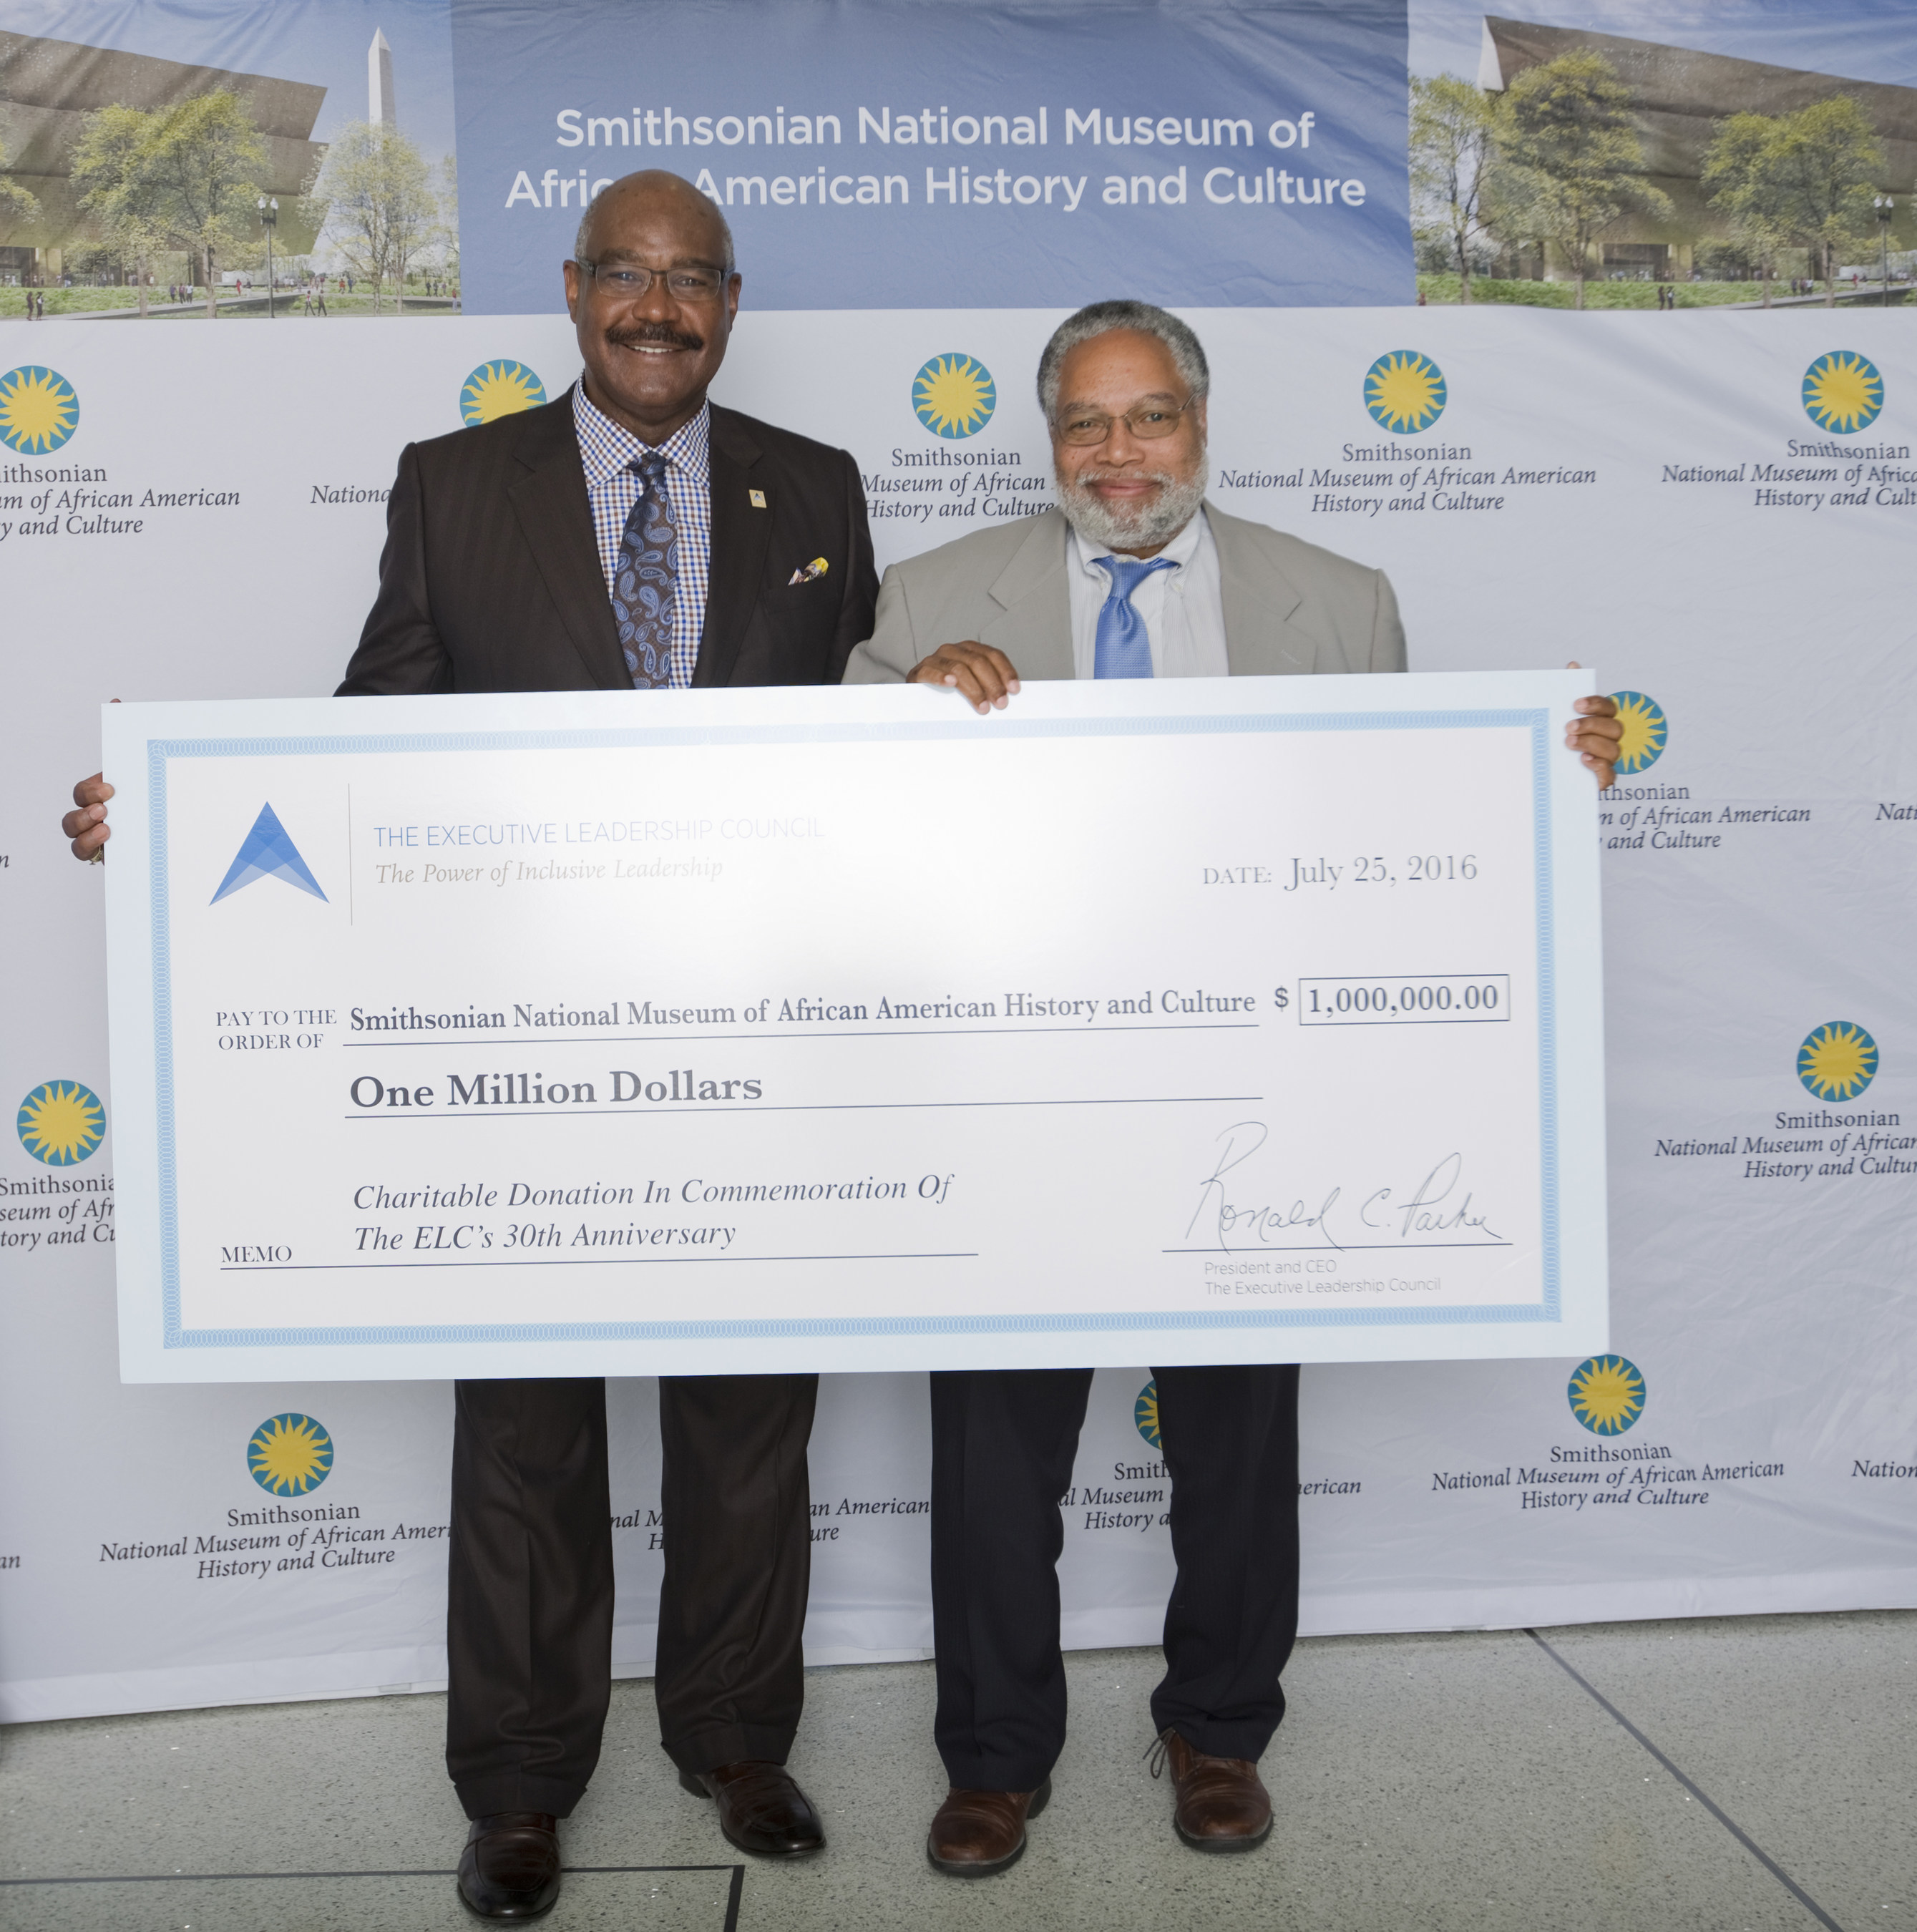 The Executive Leadership Council (ELC) donates one million dollars to the Museum of African American History and Culture (NMAAHC) in Washington, D.C. (l-r) ELC President & CEO Ronald C. Parker and Lonnie G. Bunch III, Director, NMAAHC. (Photo by Leah L. Jones/for NMAAHC)